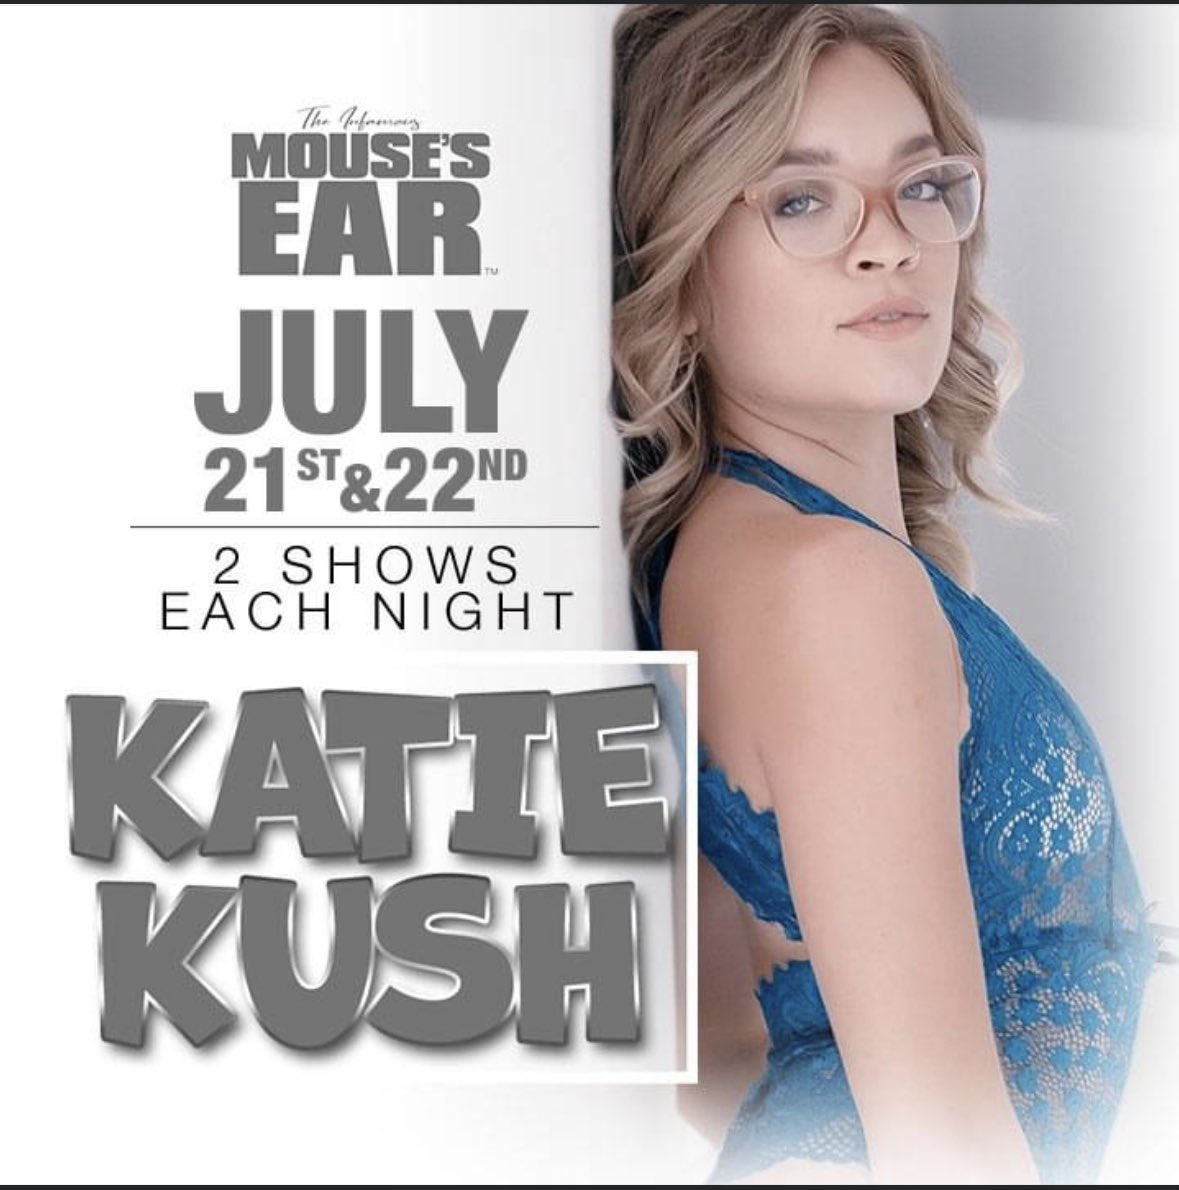 Can’t wait for @katiekushxx2 at @MousesEar2 mouses ear johnson city later this month! Going to be 2 nights of great shows!! #johnsoncity